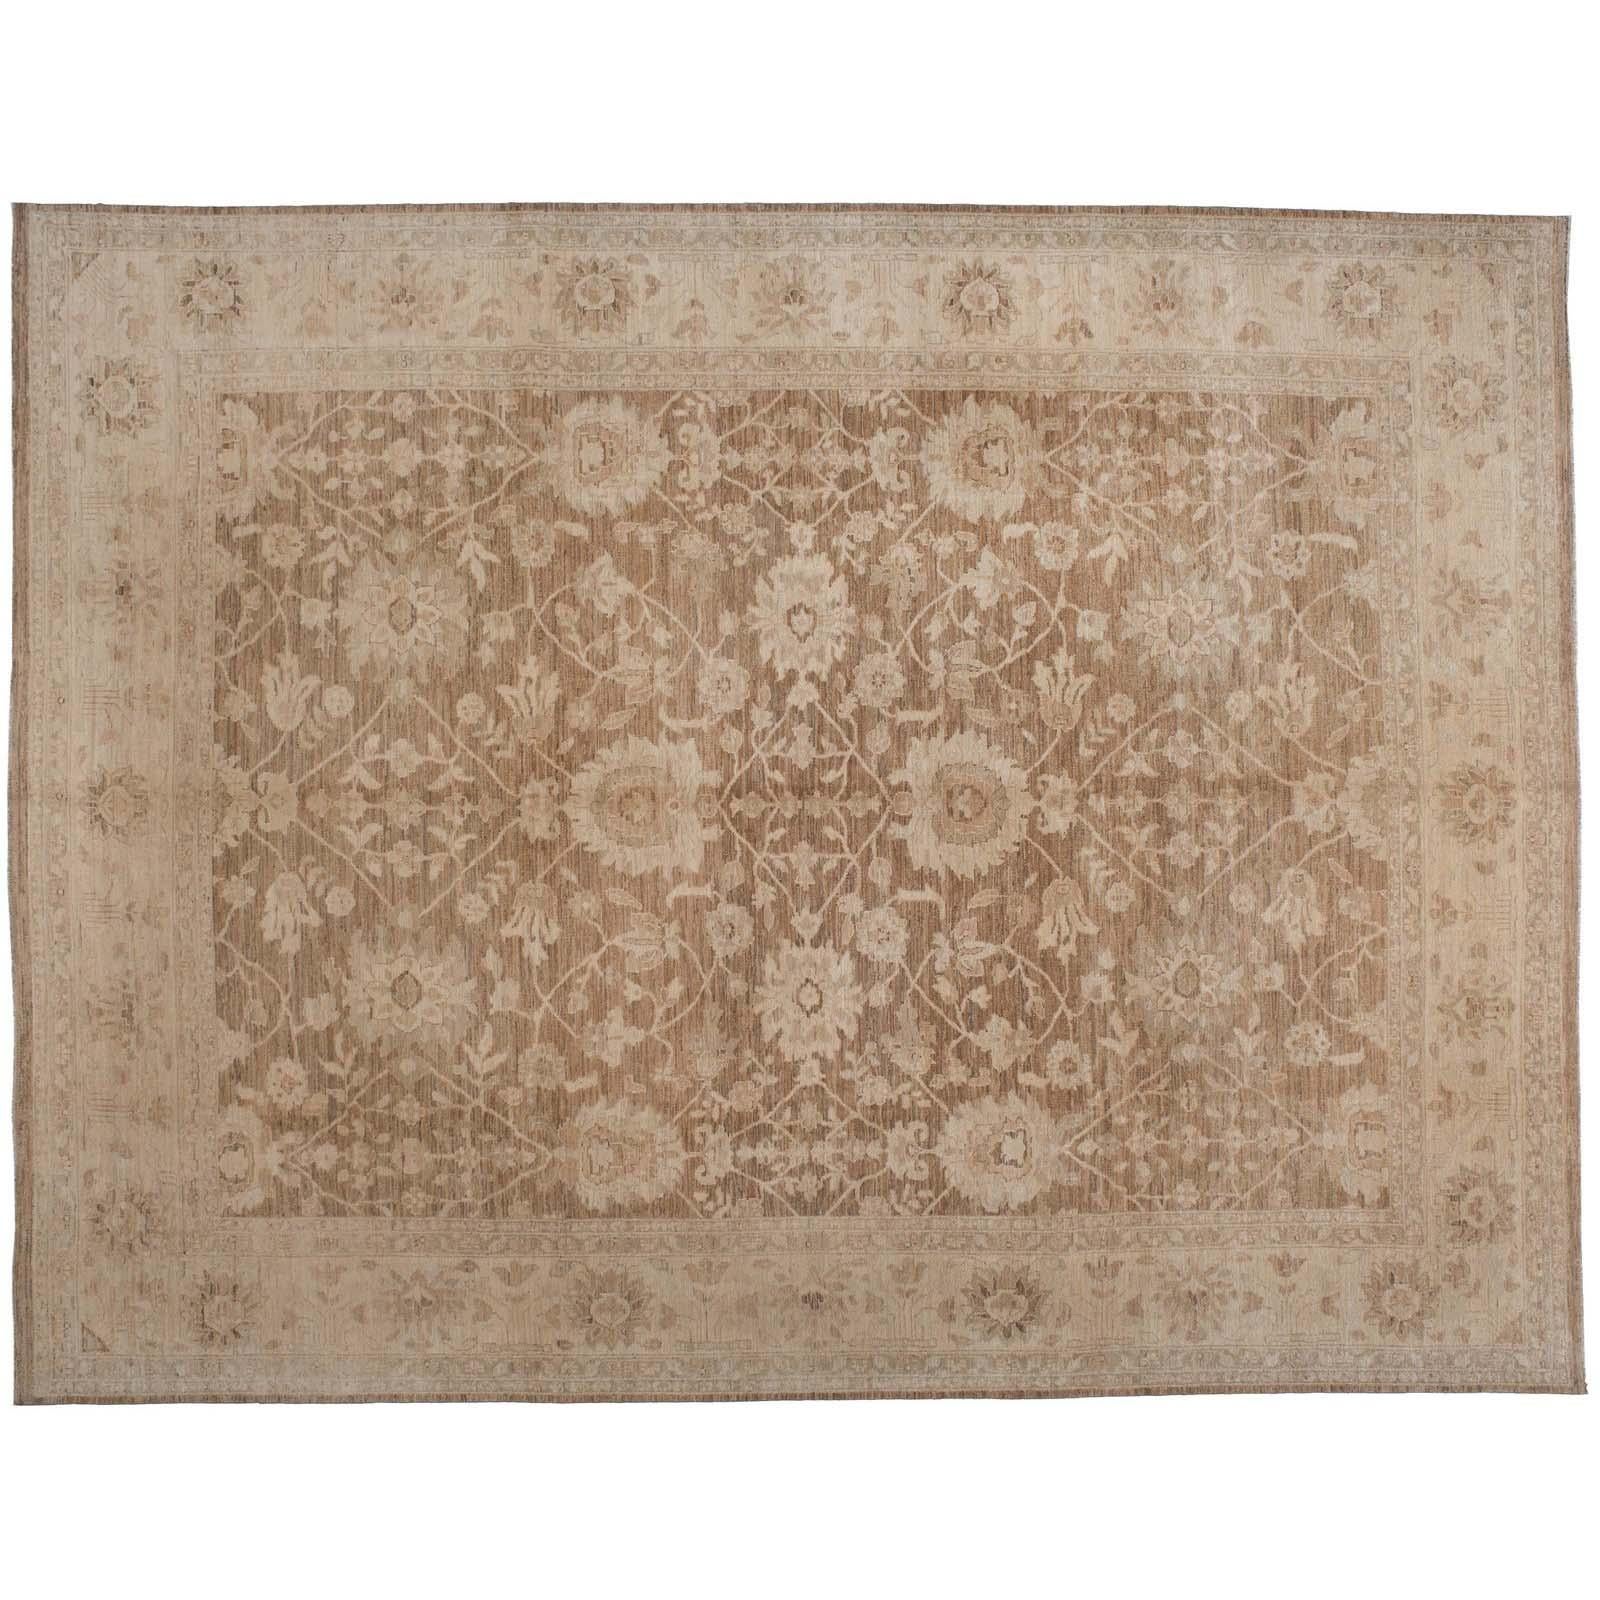 Traditional Pakistani Brown Floral Wool Area Rug For Sale